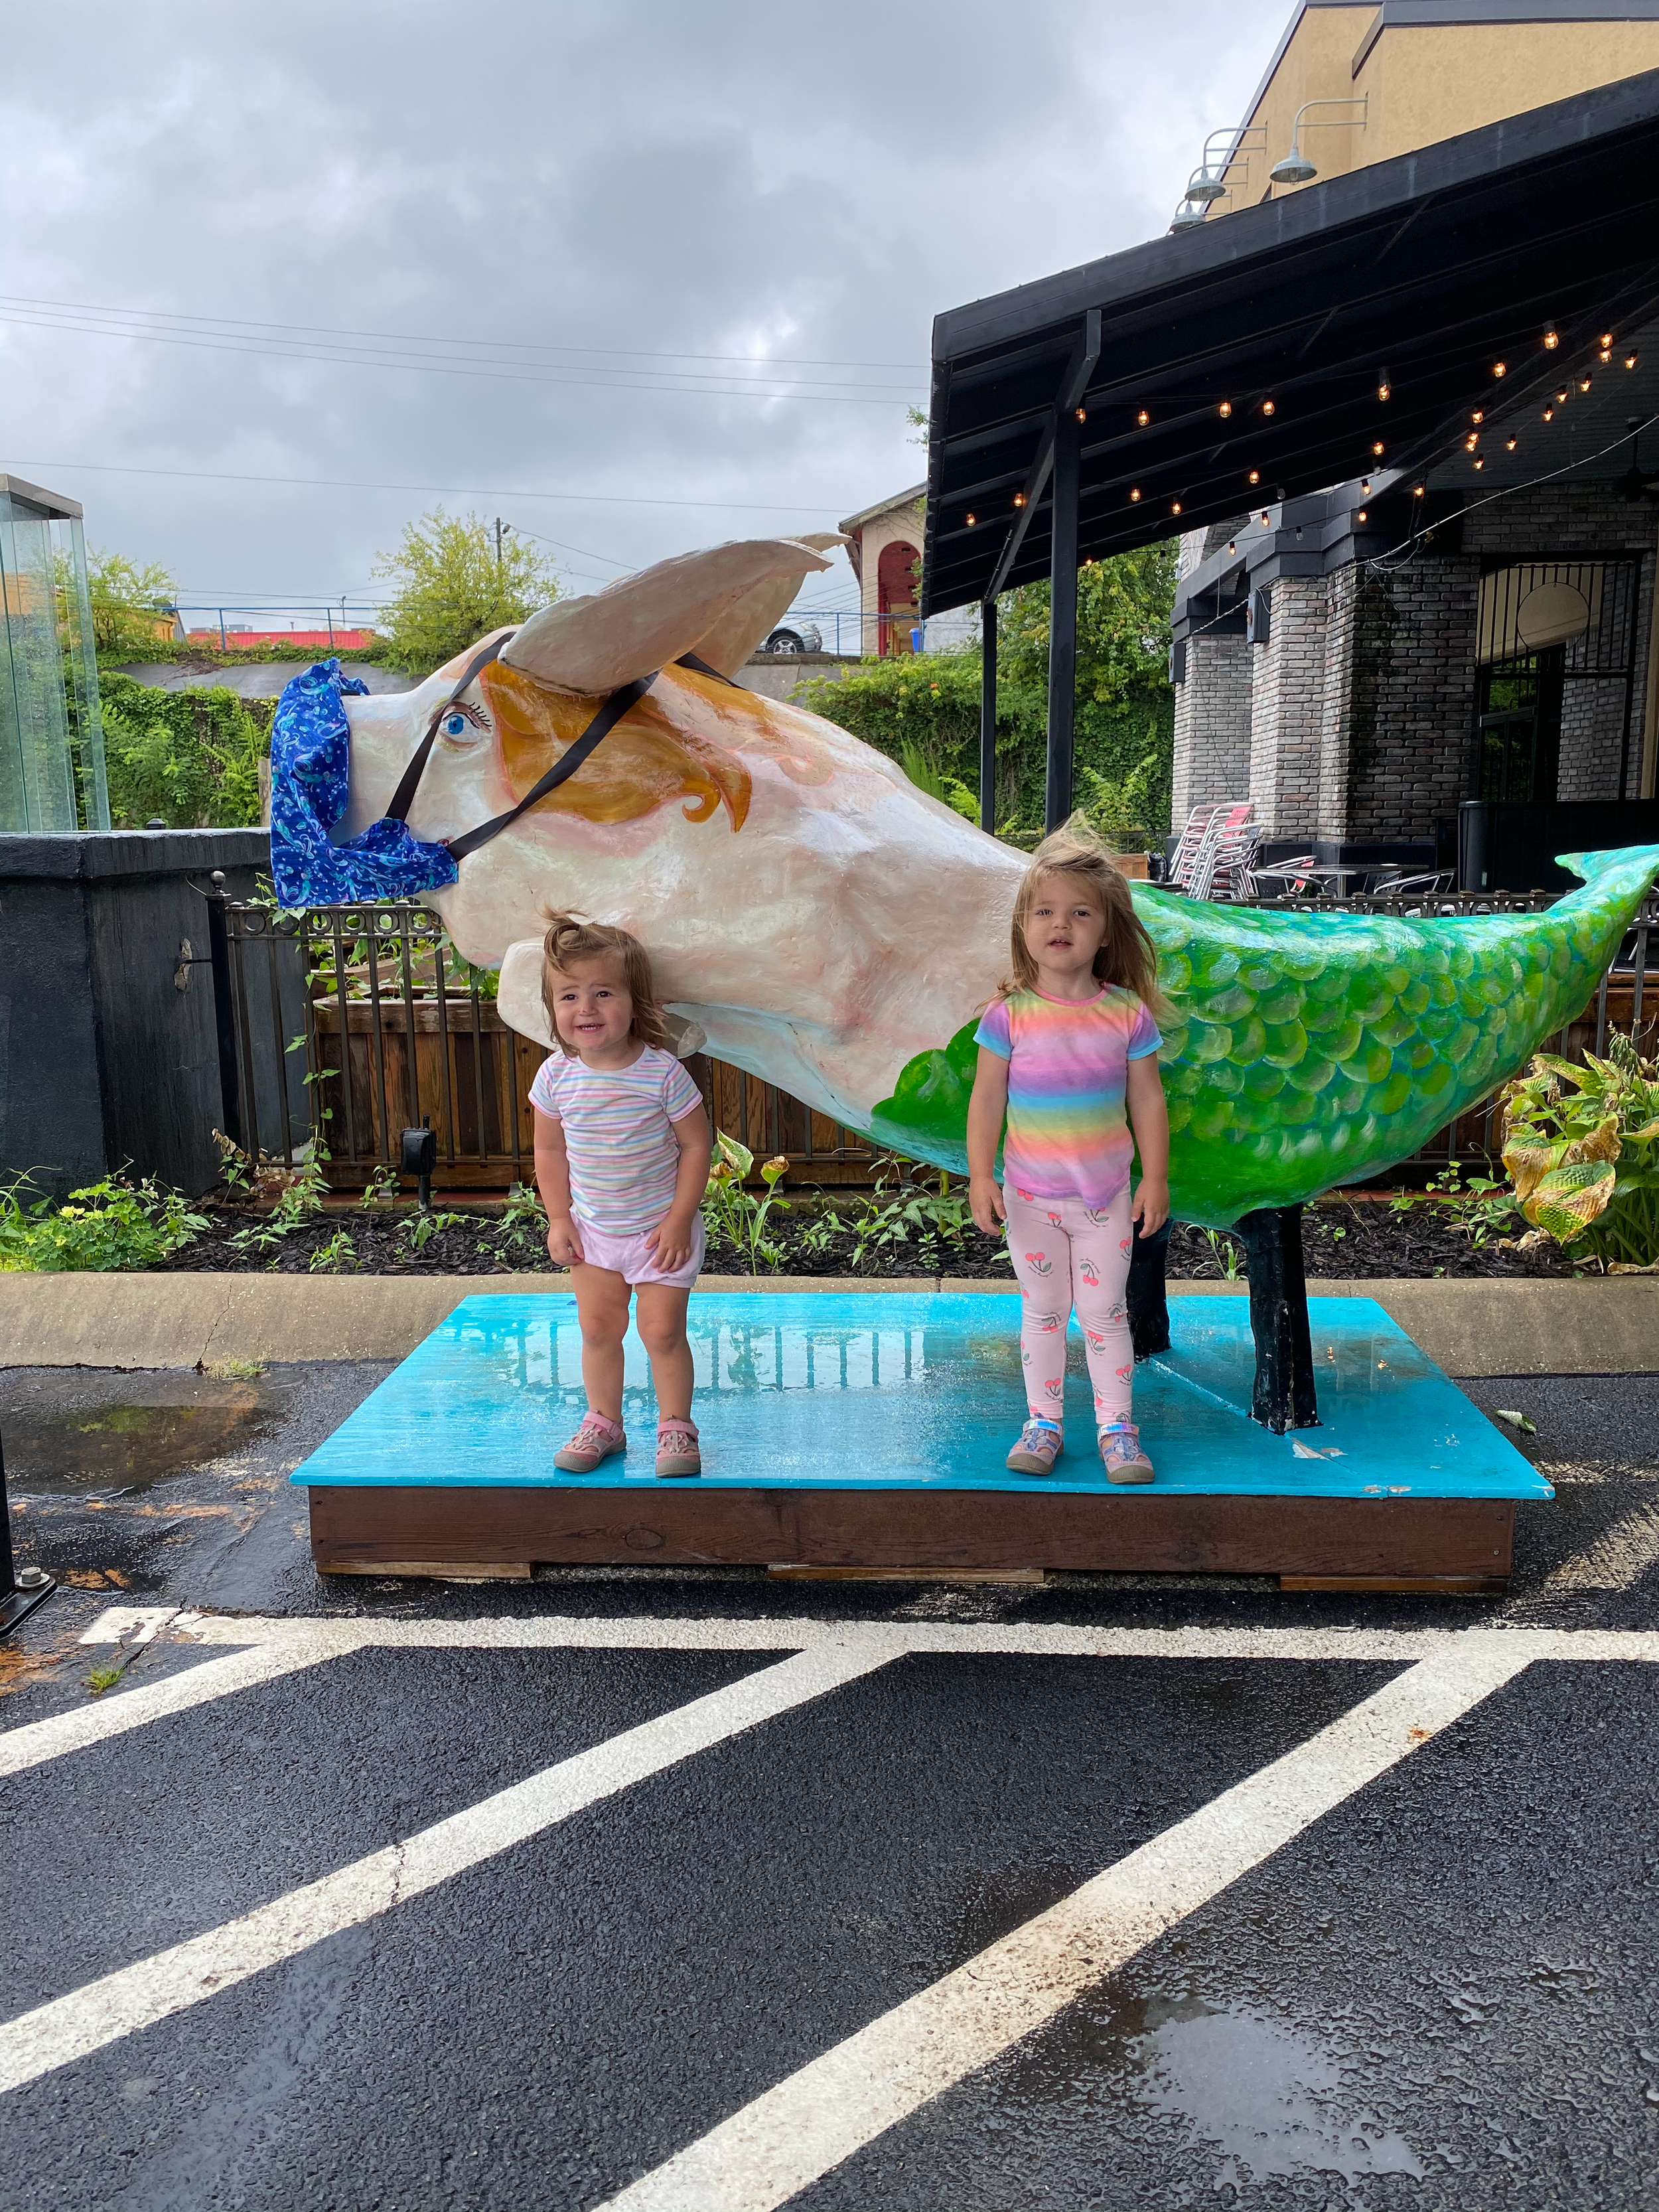 Two little girls stand in front of "Priscilla" pig at Mermaids Seafood Restaurant